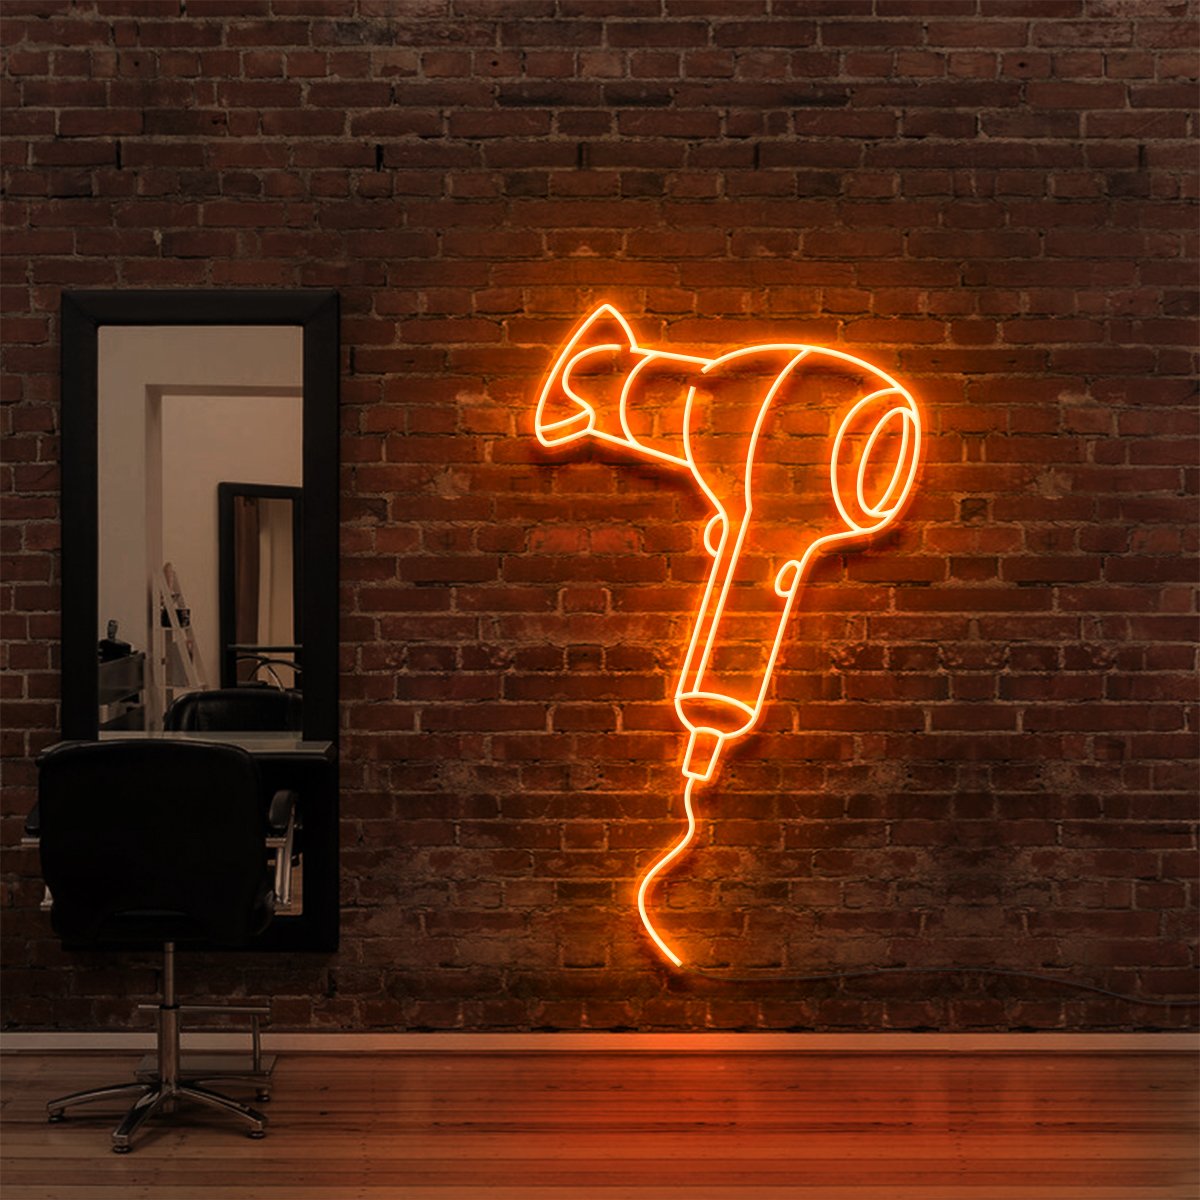 "Blowdryer" Neon Sign for Hair Salons & Barbershops 60cm (2ft) / Orange / LED Neon by Neon Icons